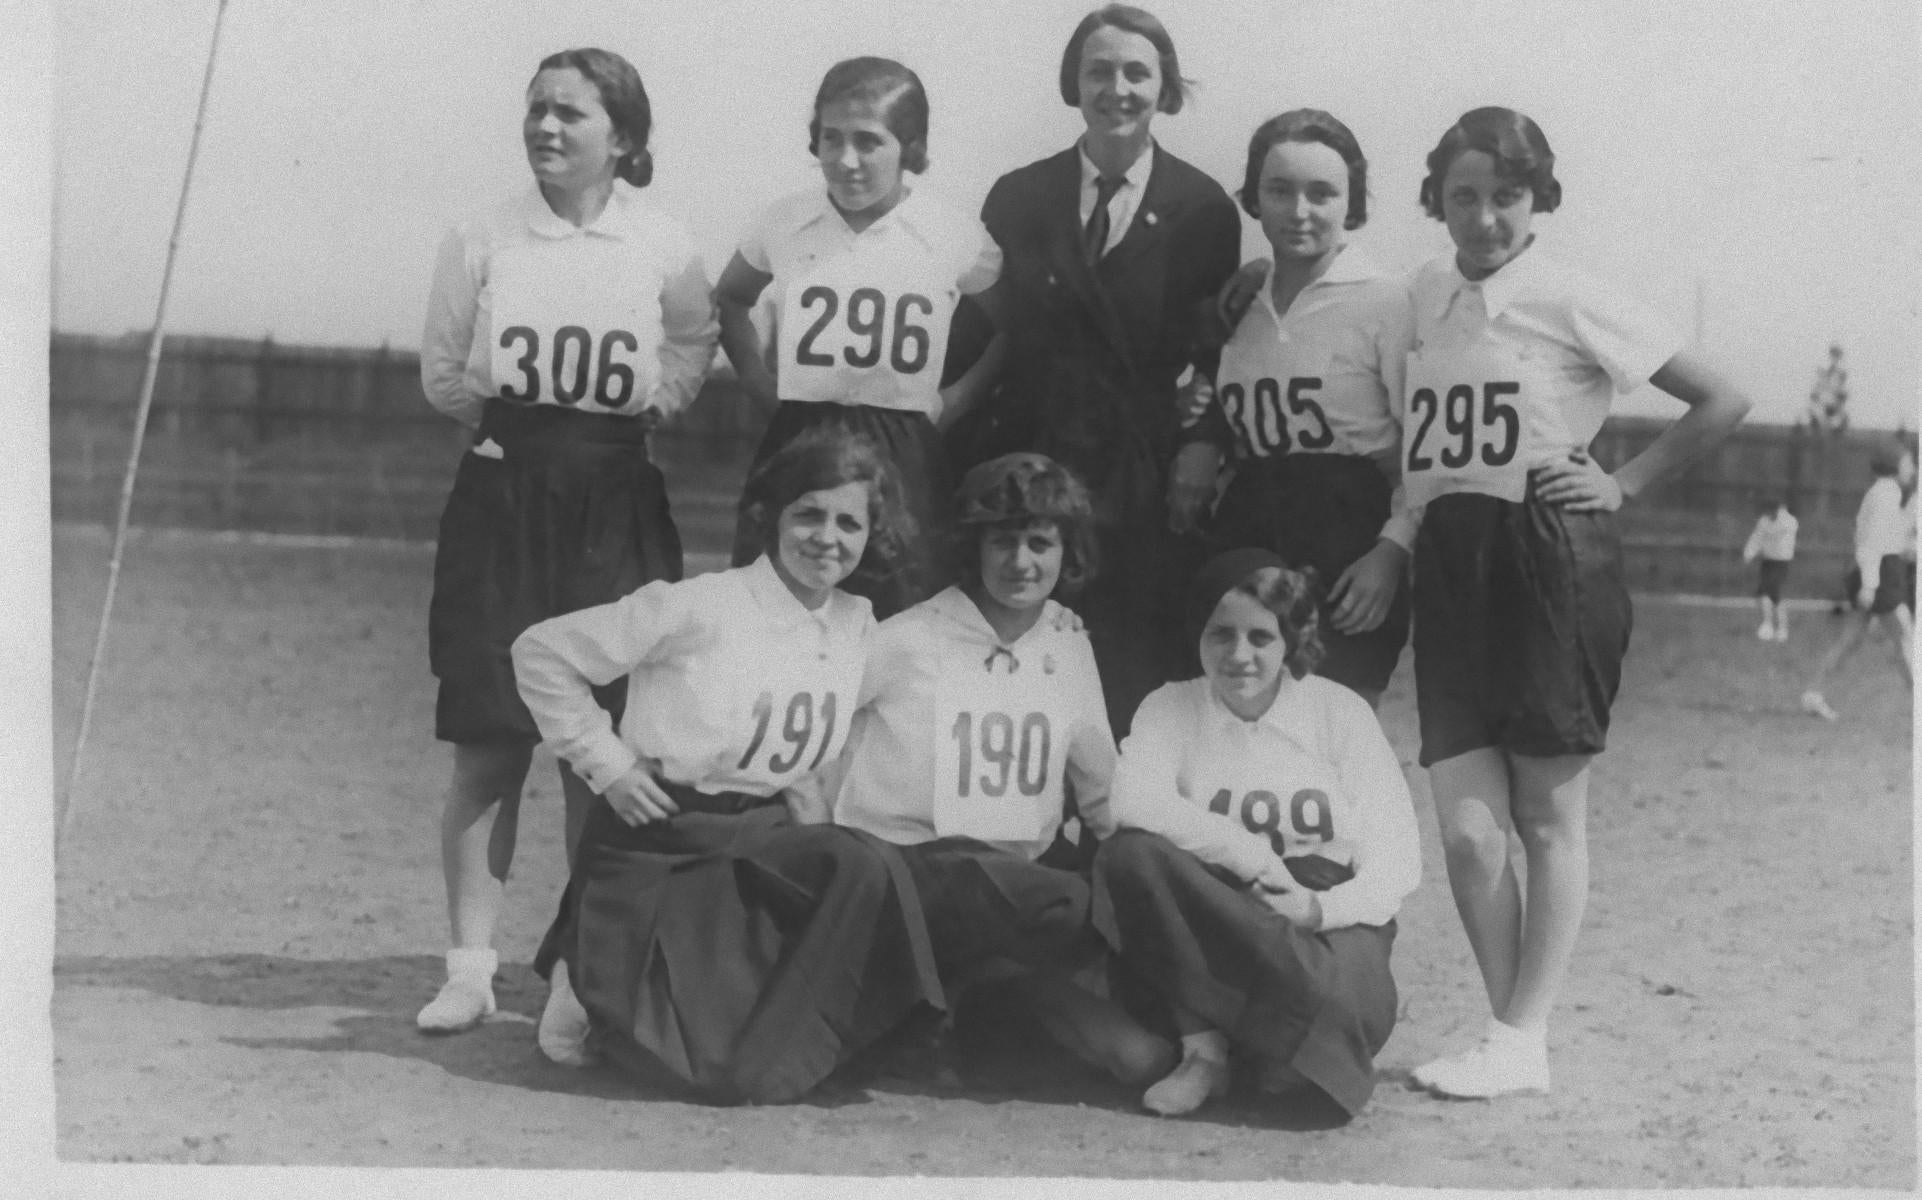 Unknown Portrait Photograph – Young Girls Posing for a Photo Before a Marathon - Vintage b/w Foto - 1934 ca.